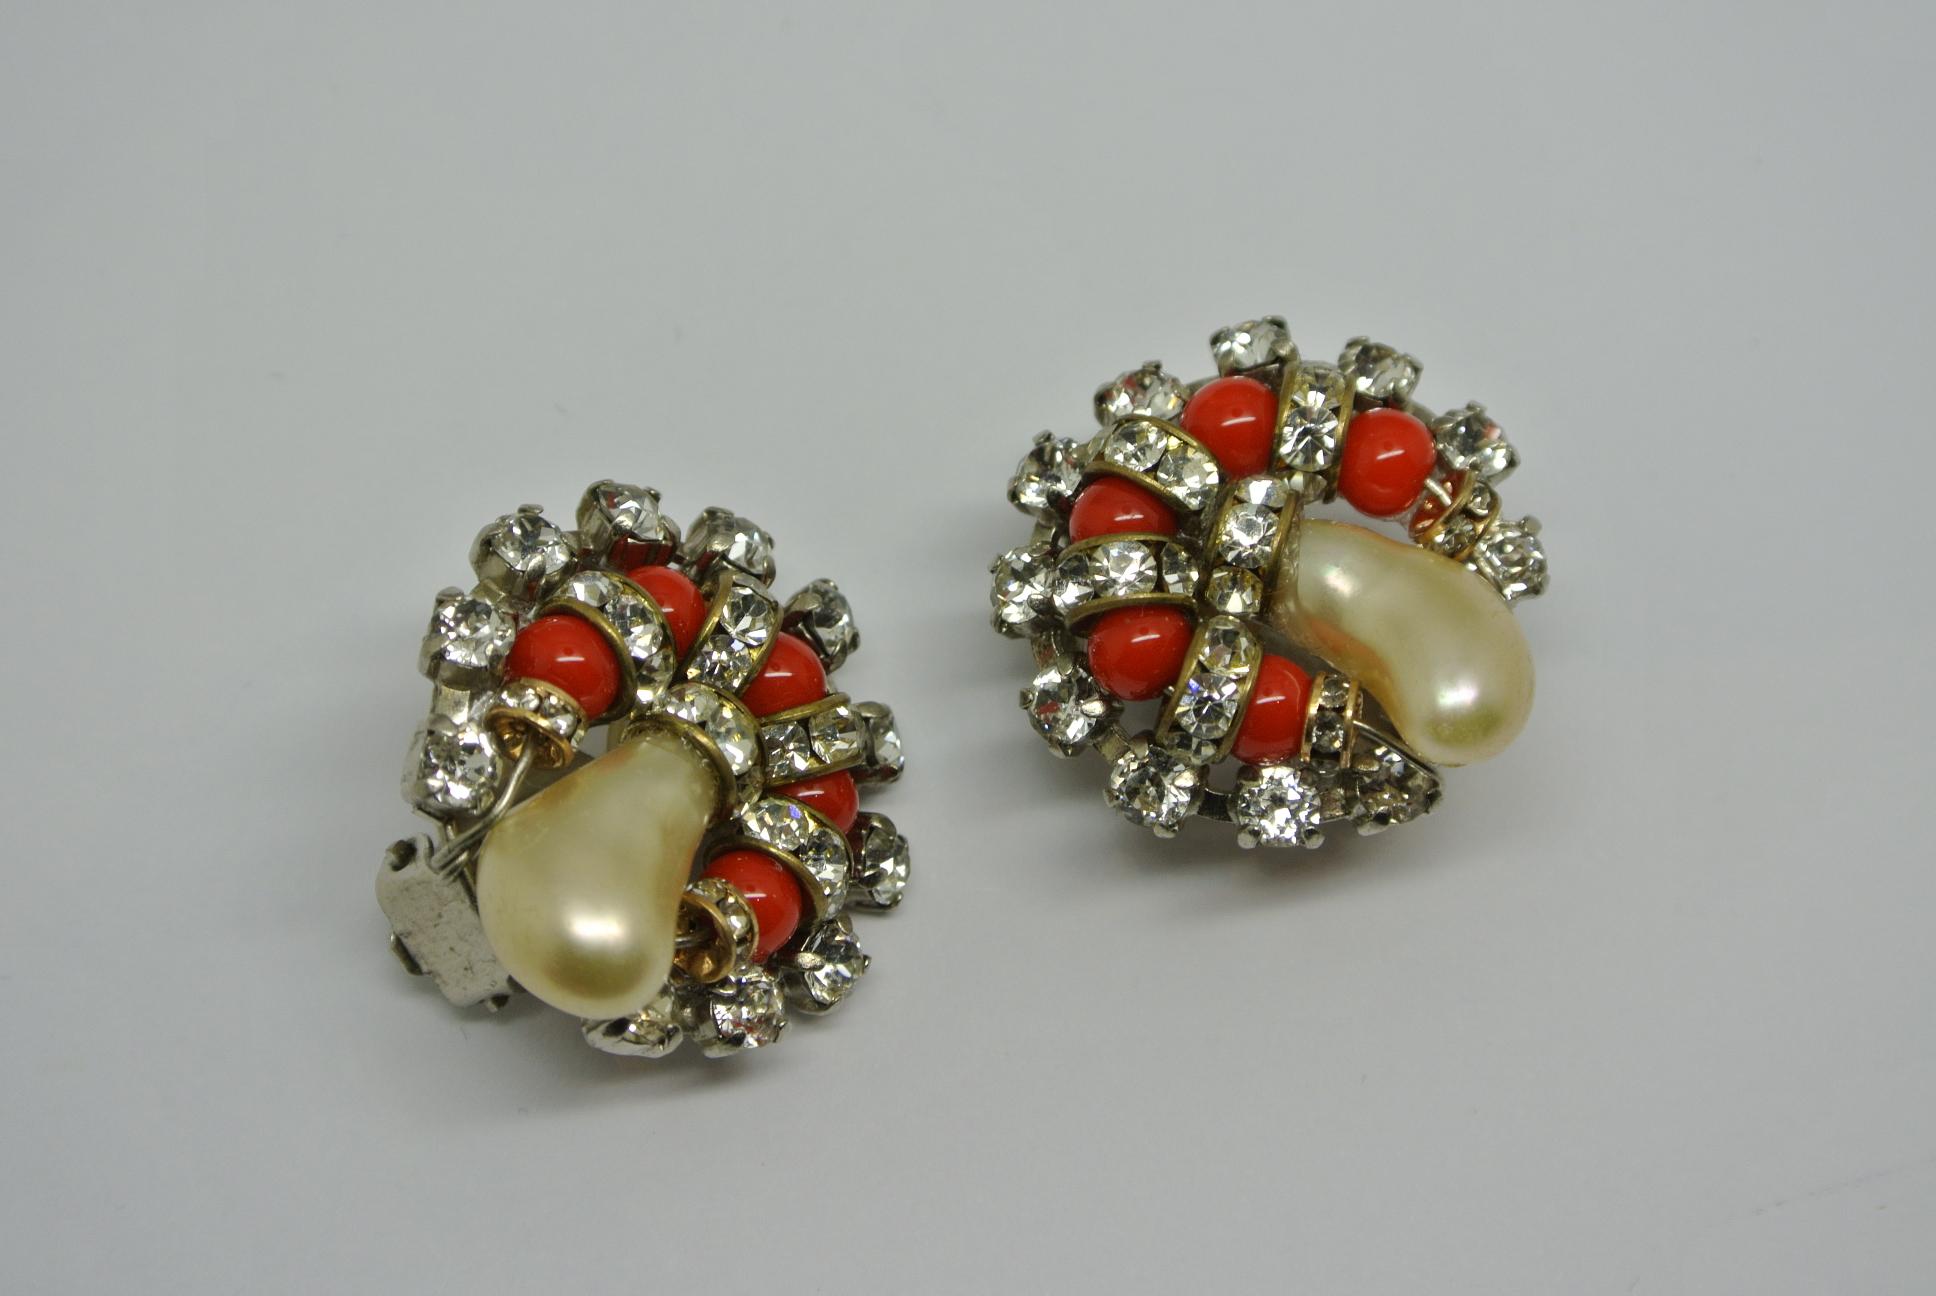 Pair of Chanel baroque pearl earrings, dated 1960s. Comes with orange glass and rhinestones. Designed by Robert Goossens. Good condition, glue marks can be seen from back side. 